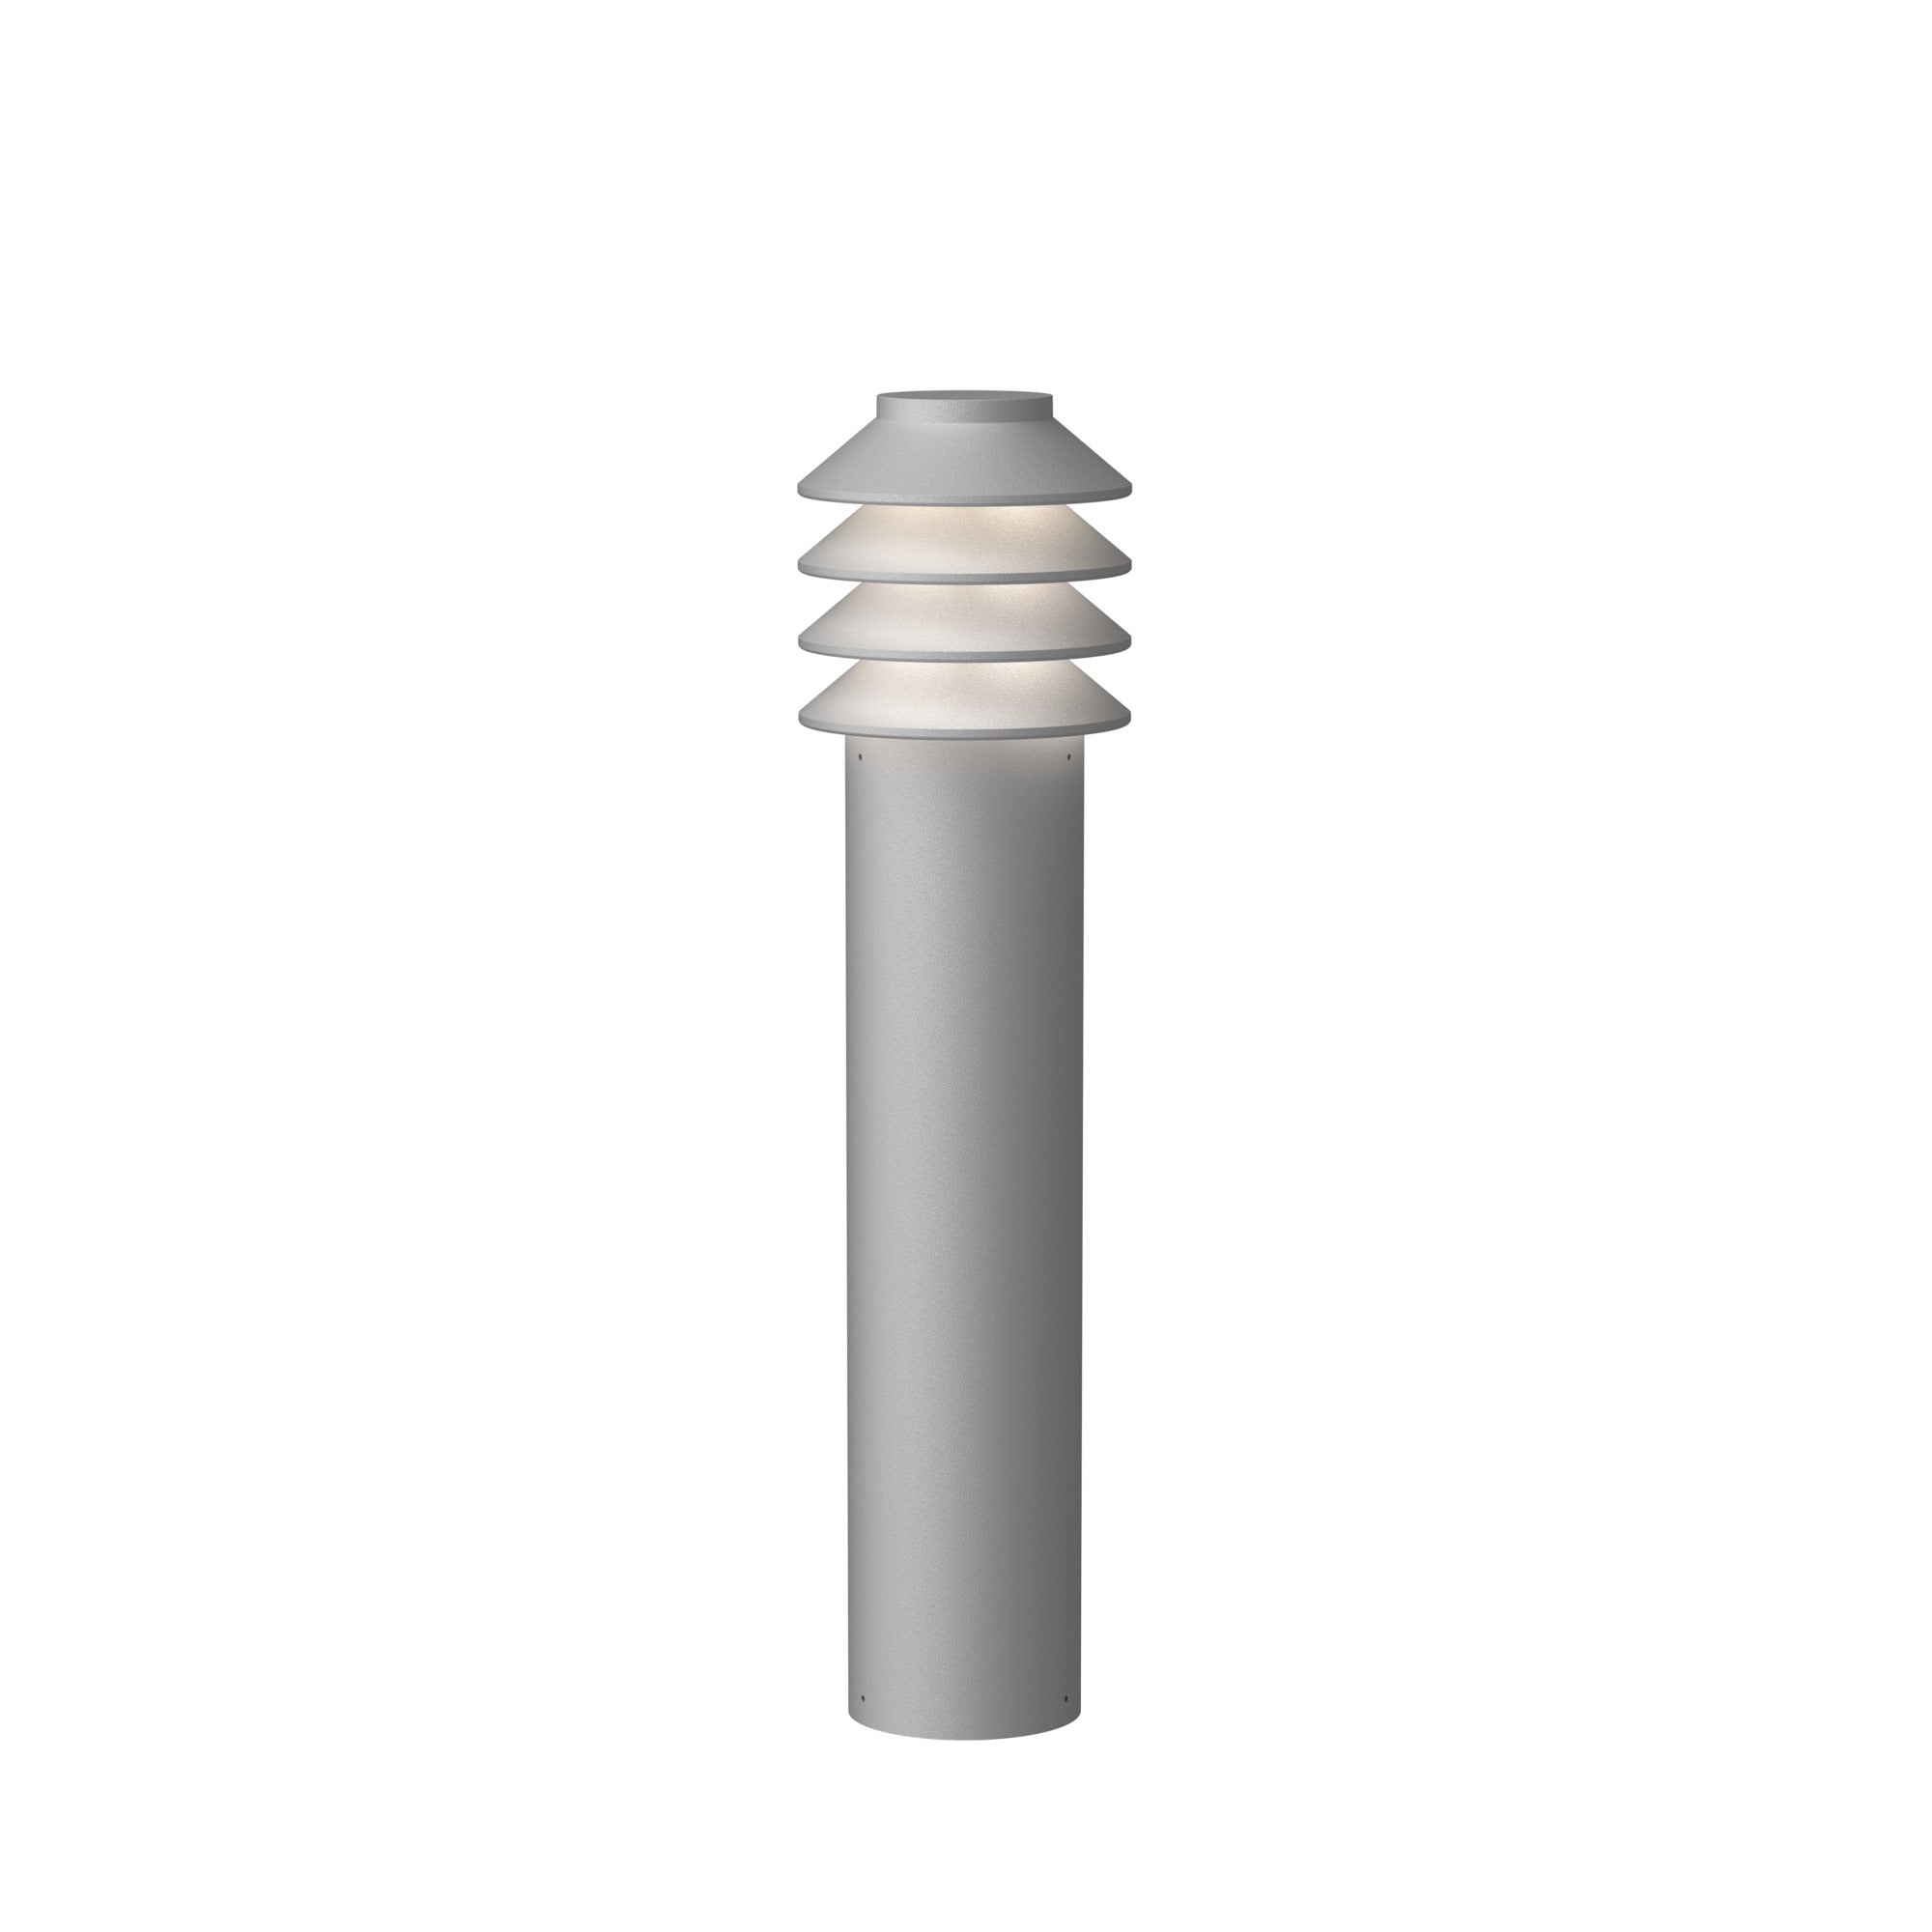 Louis Poulsen Bysted Garden Bollard Lamp Large Aluminium Led 3000 K With Earth Piece O/Adapter